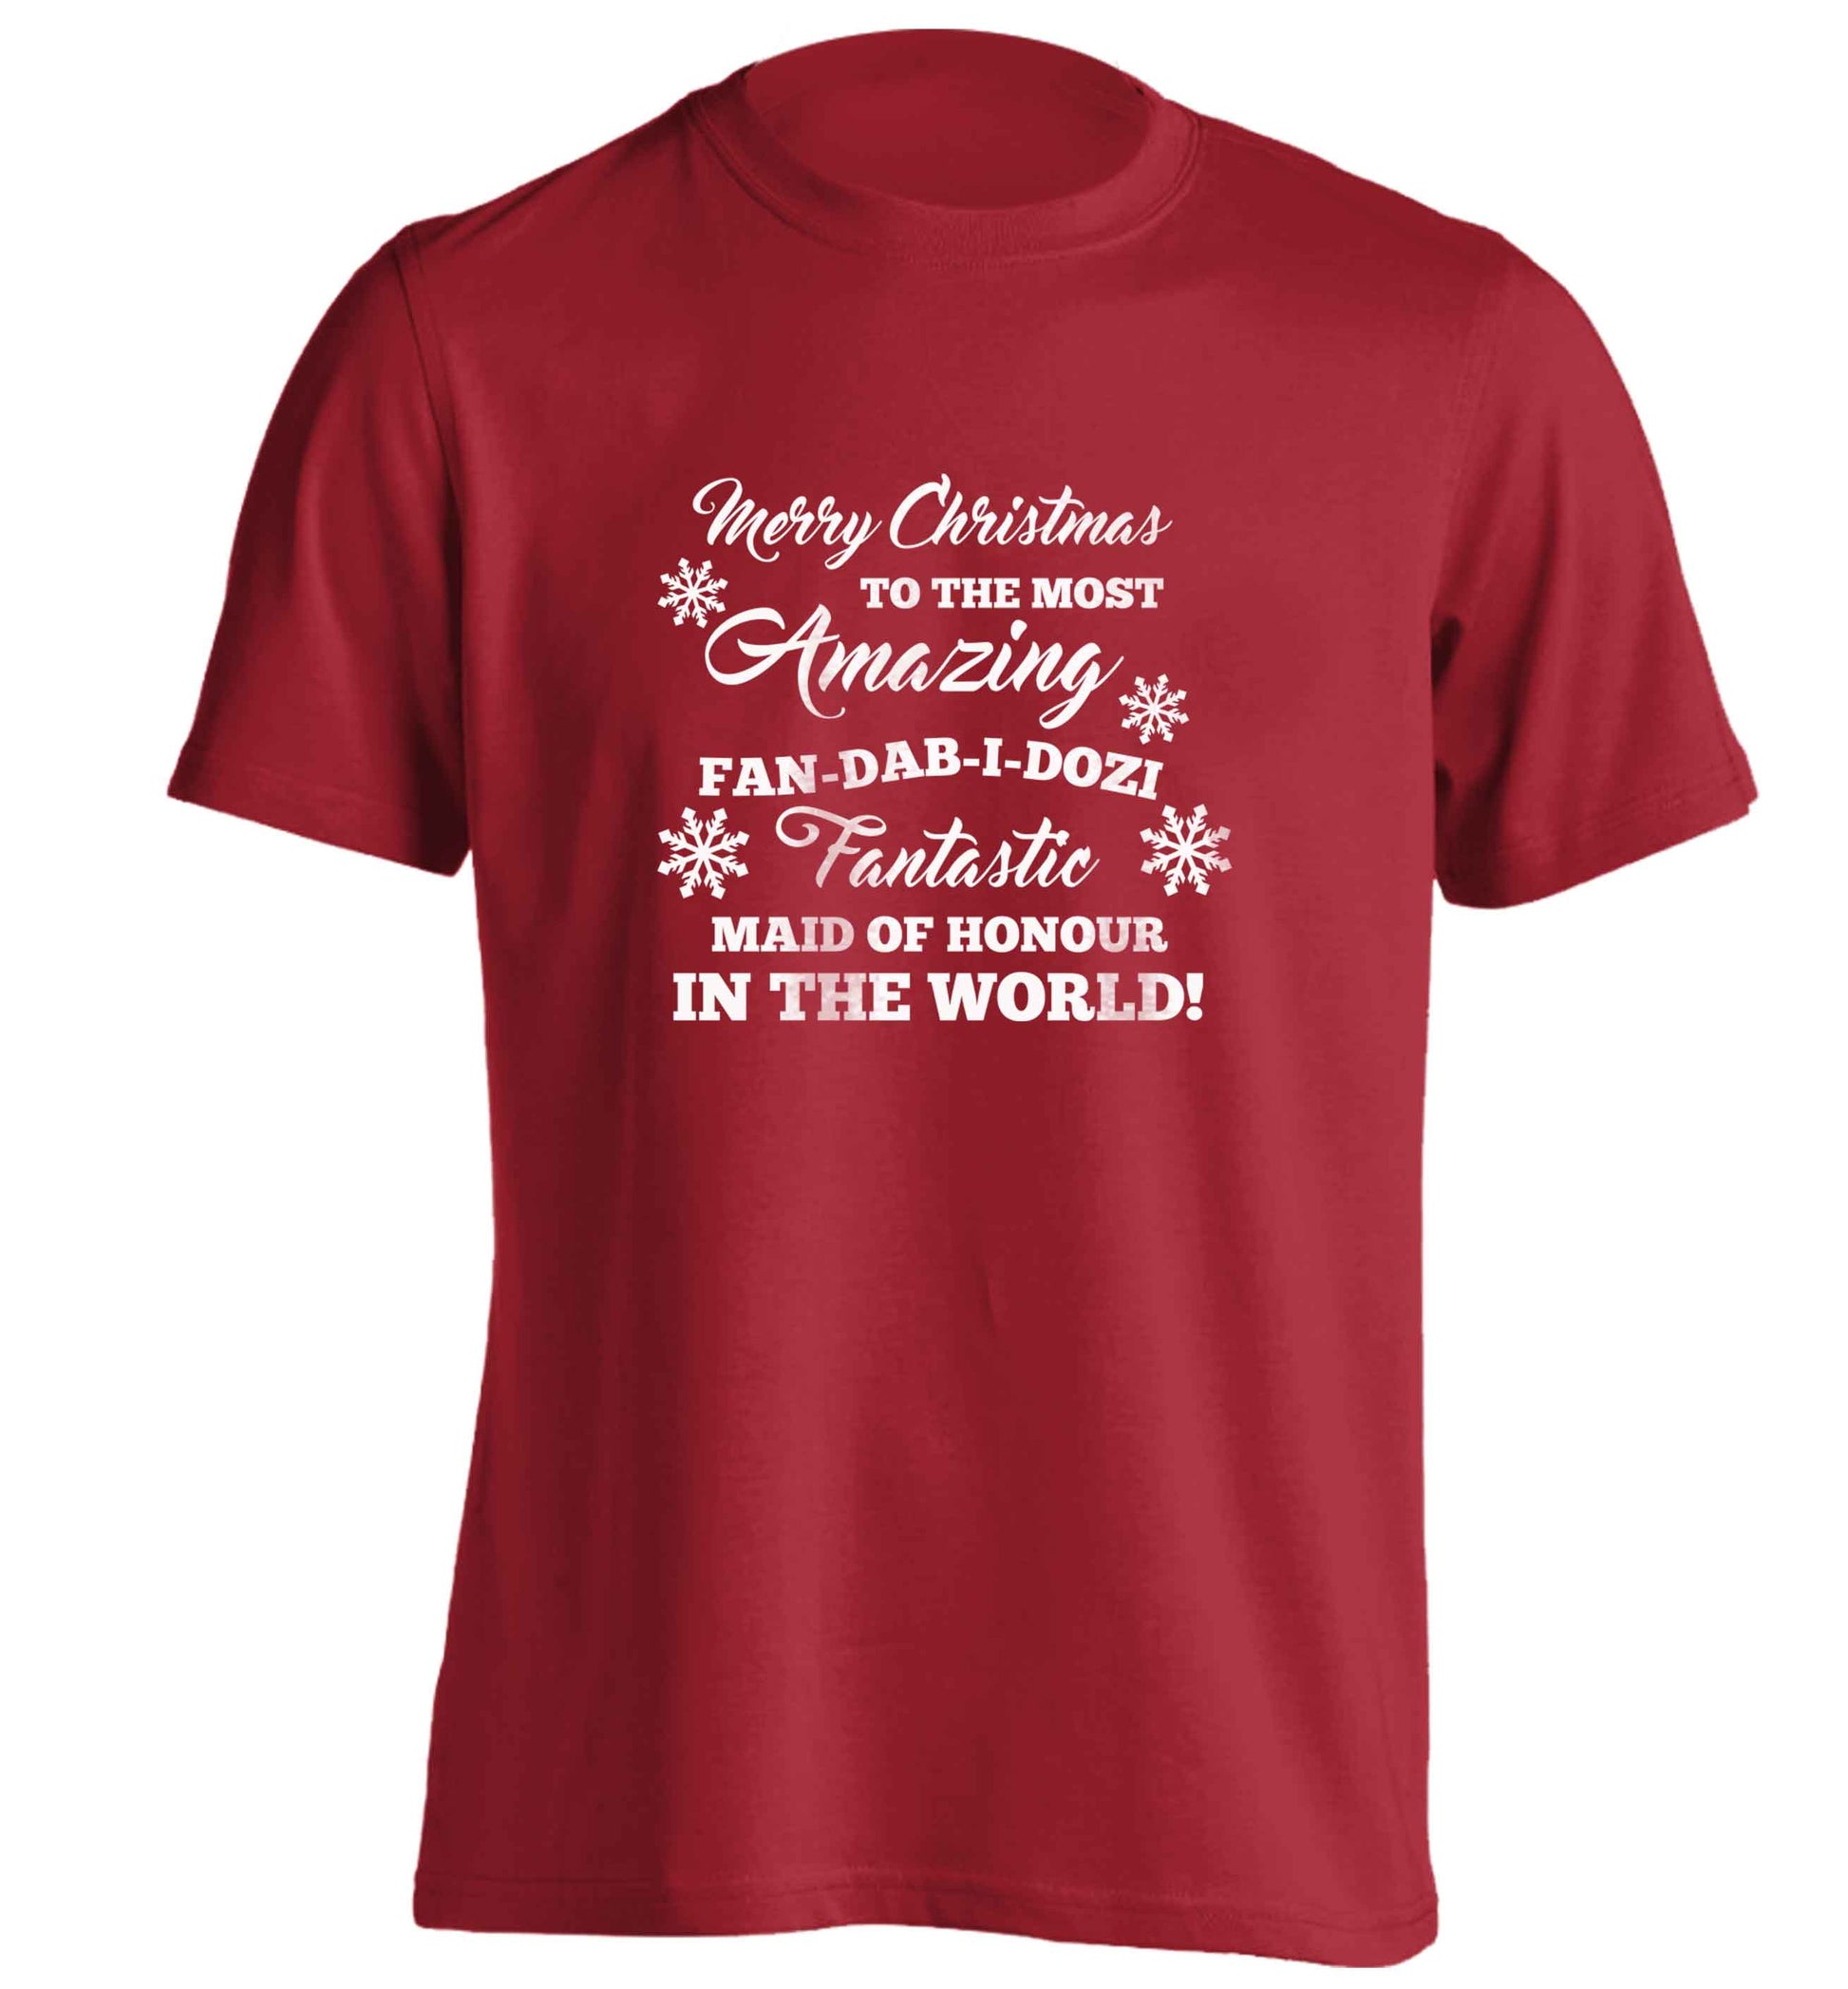 Merry Christmas to the most amazing maid of honour in the world! adults unisex red Tshirt 2XL